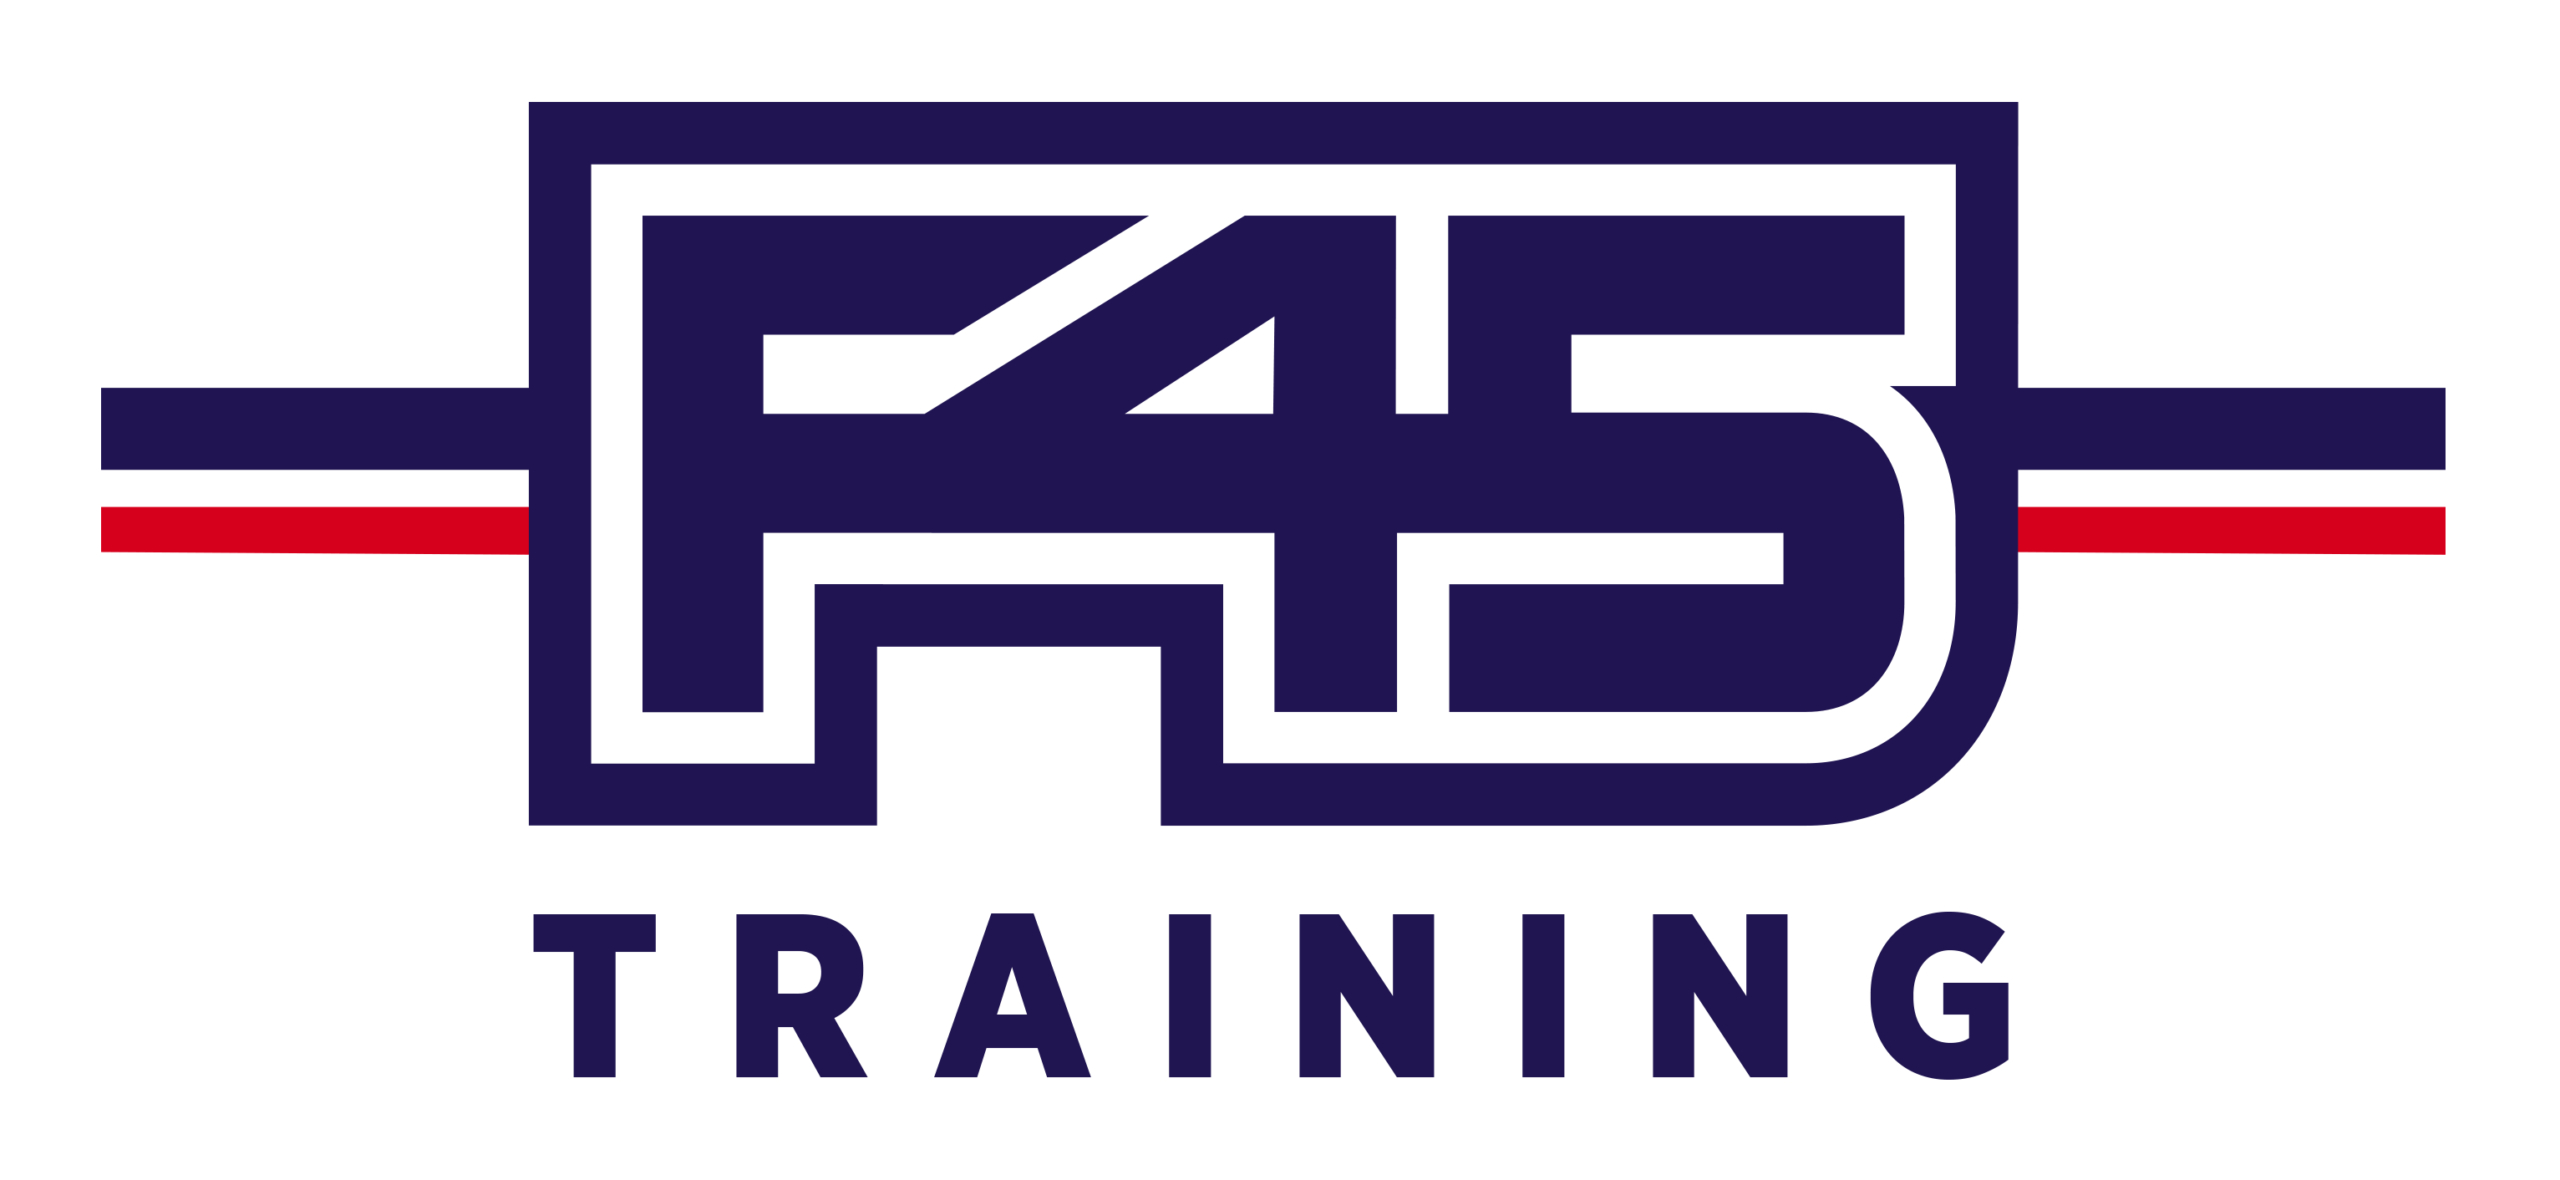 F45 Training reduces admin time by streamlining software